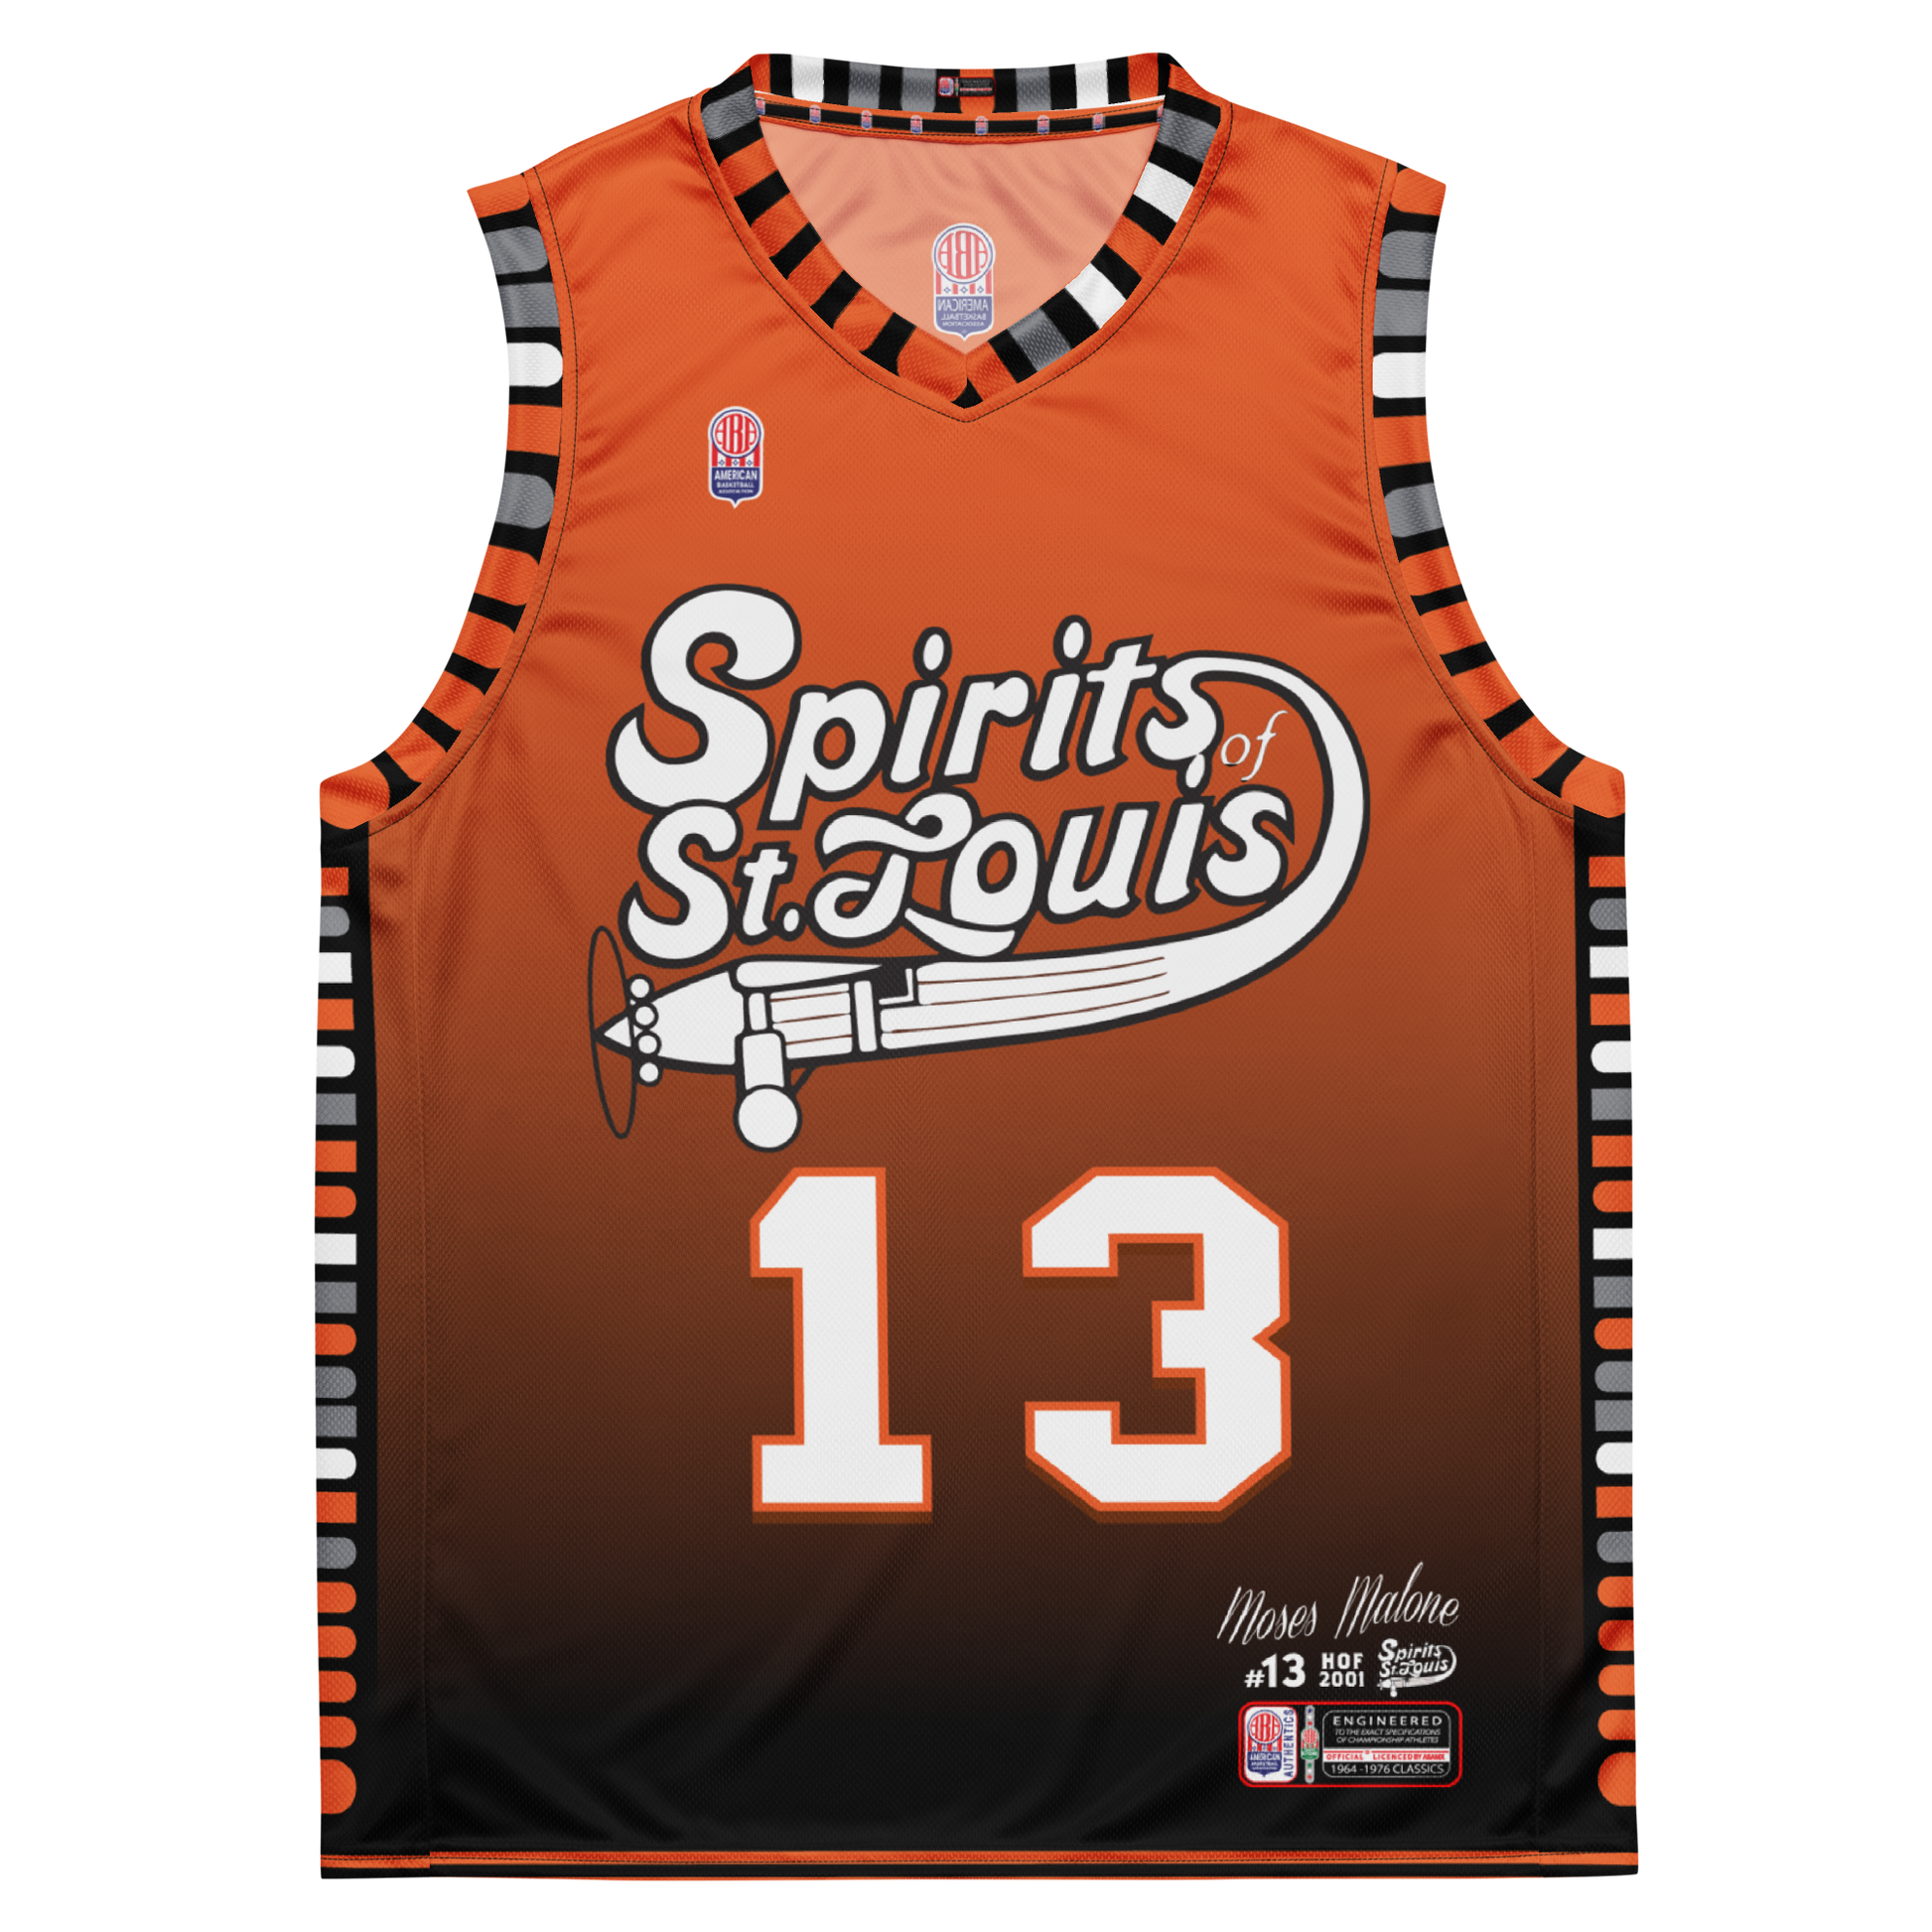 I-conic #15 Moses Malone jersey, a tribute to the basketball legend